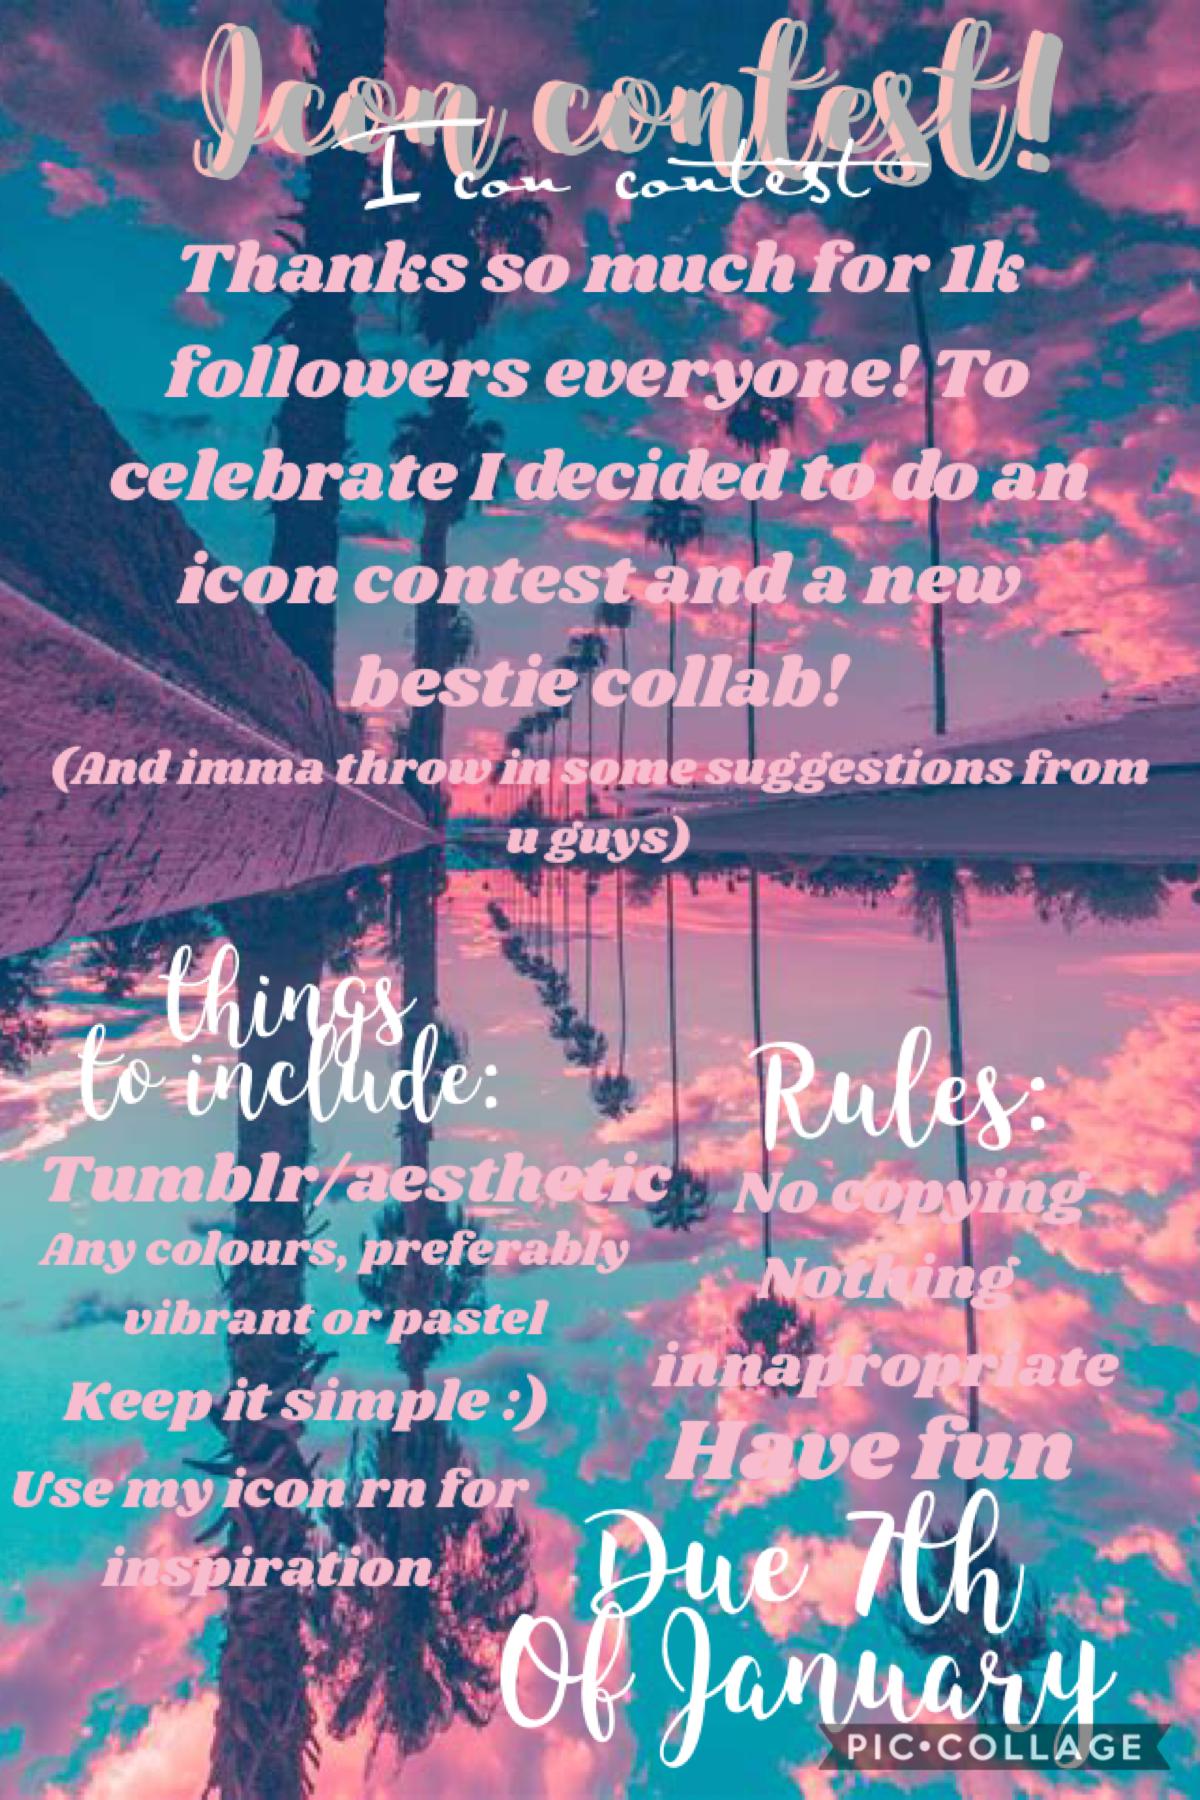 yay!! icon contest time 🥳🥳 make sure to spread the word 💗